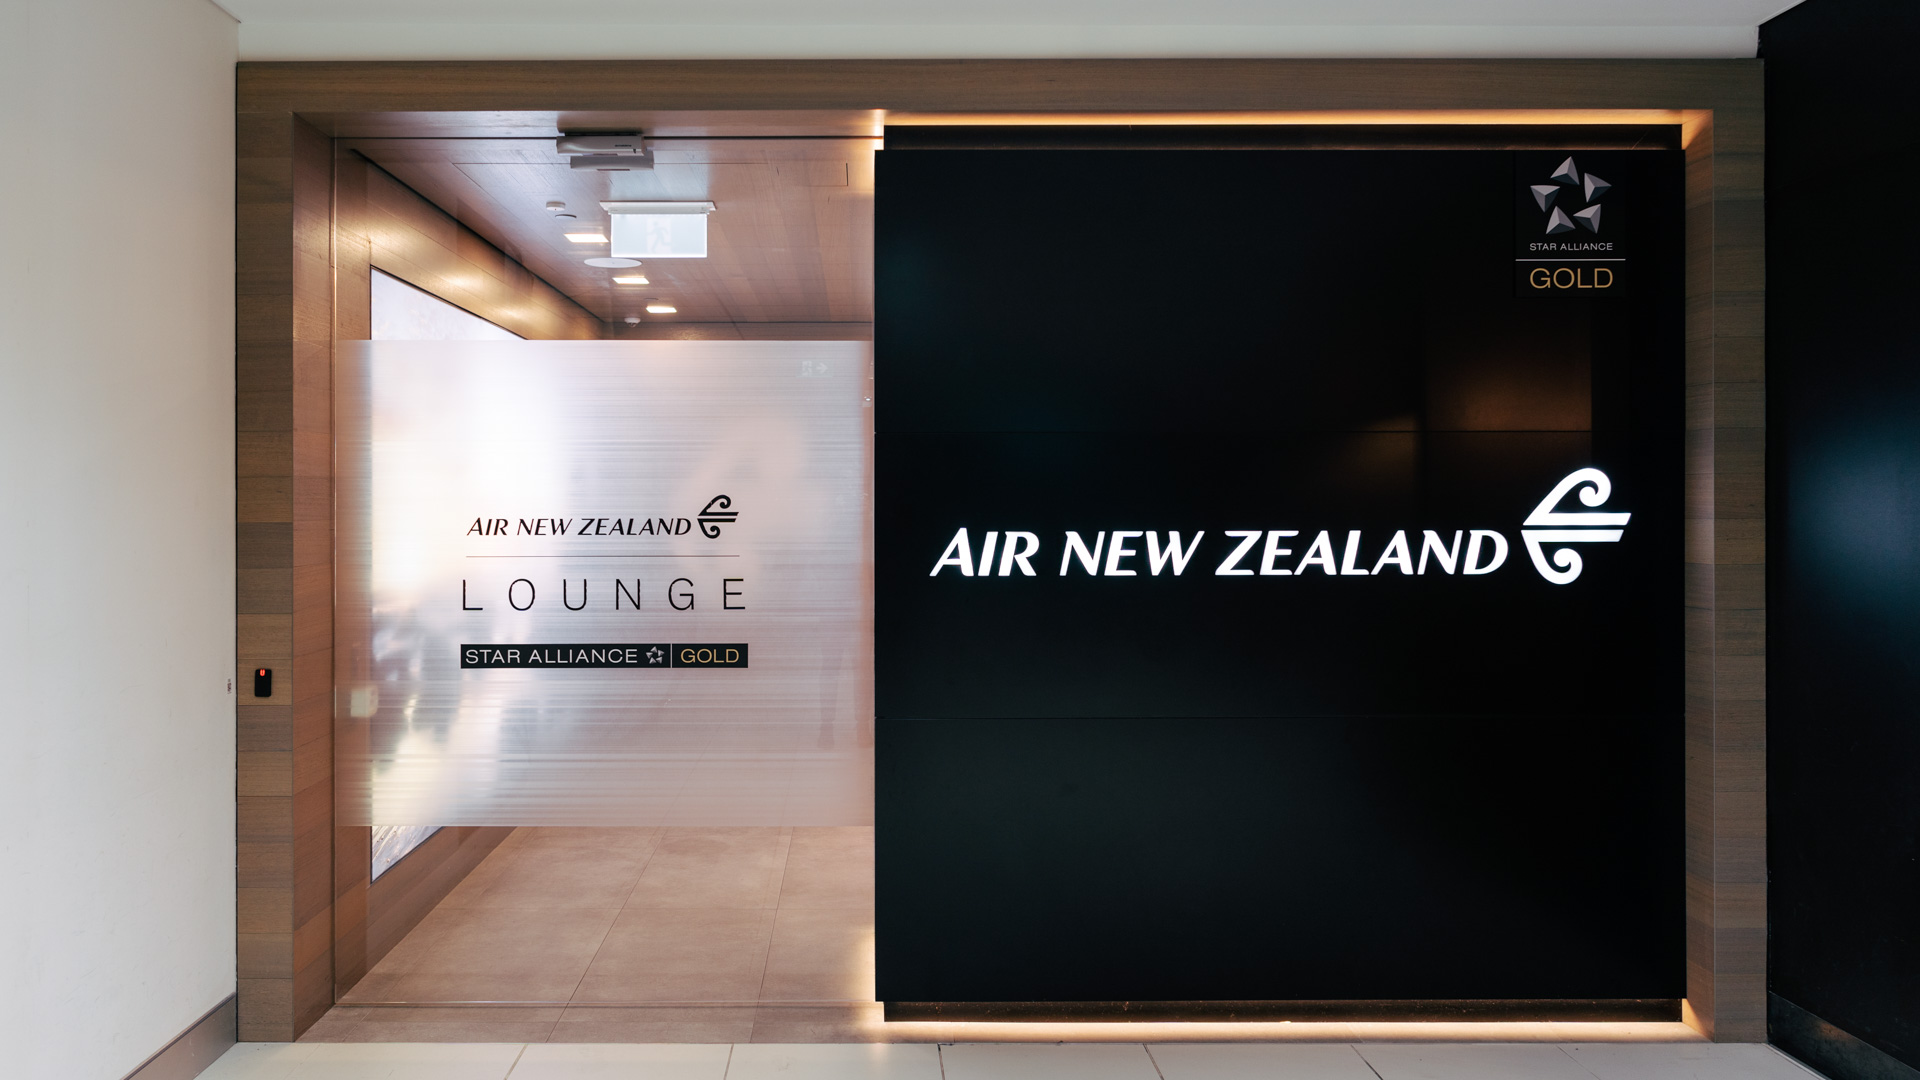 Air New Zealand Lounge Perth entrance